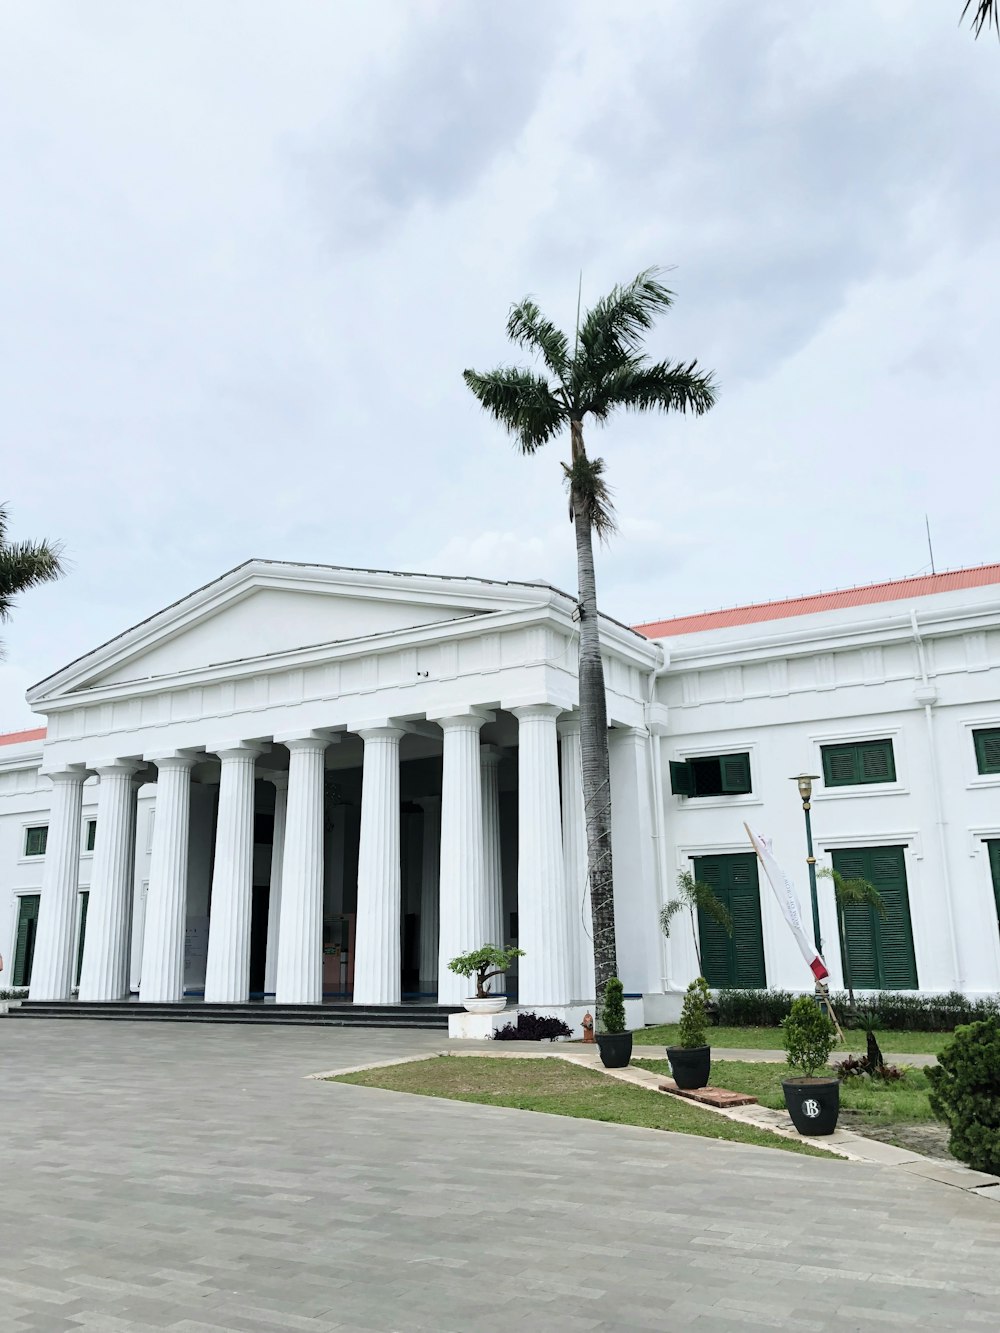 a large white building with columns and palm trees